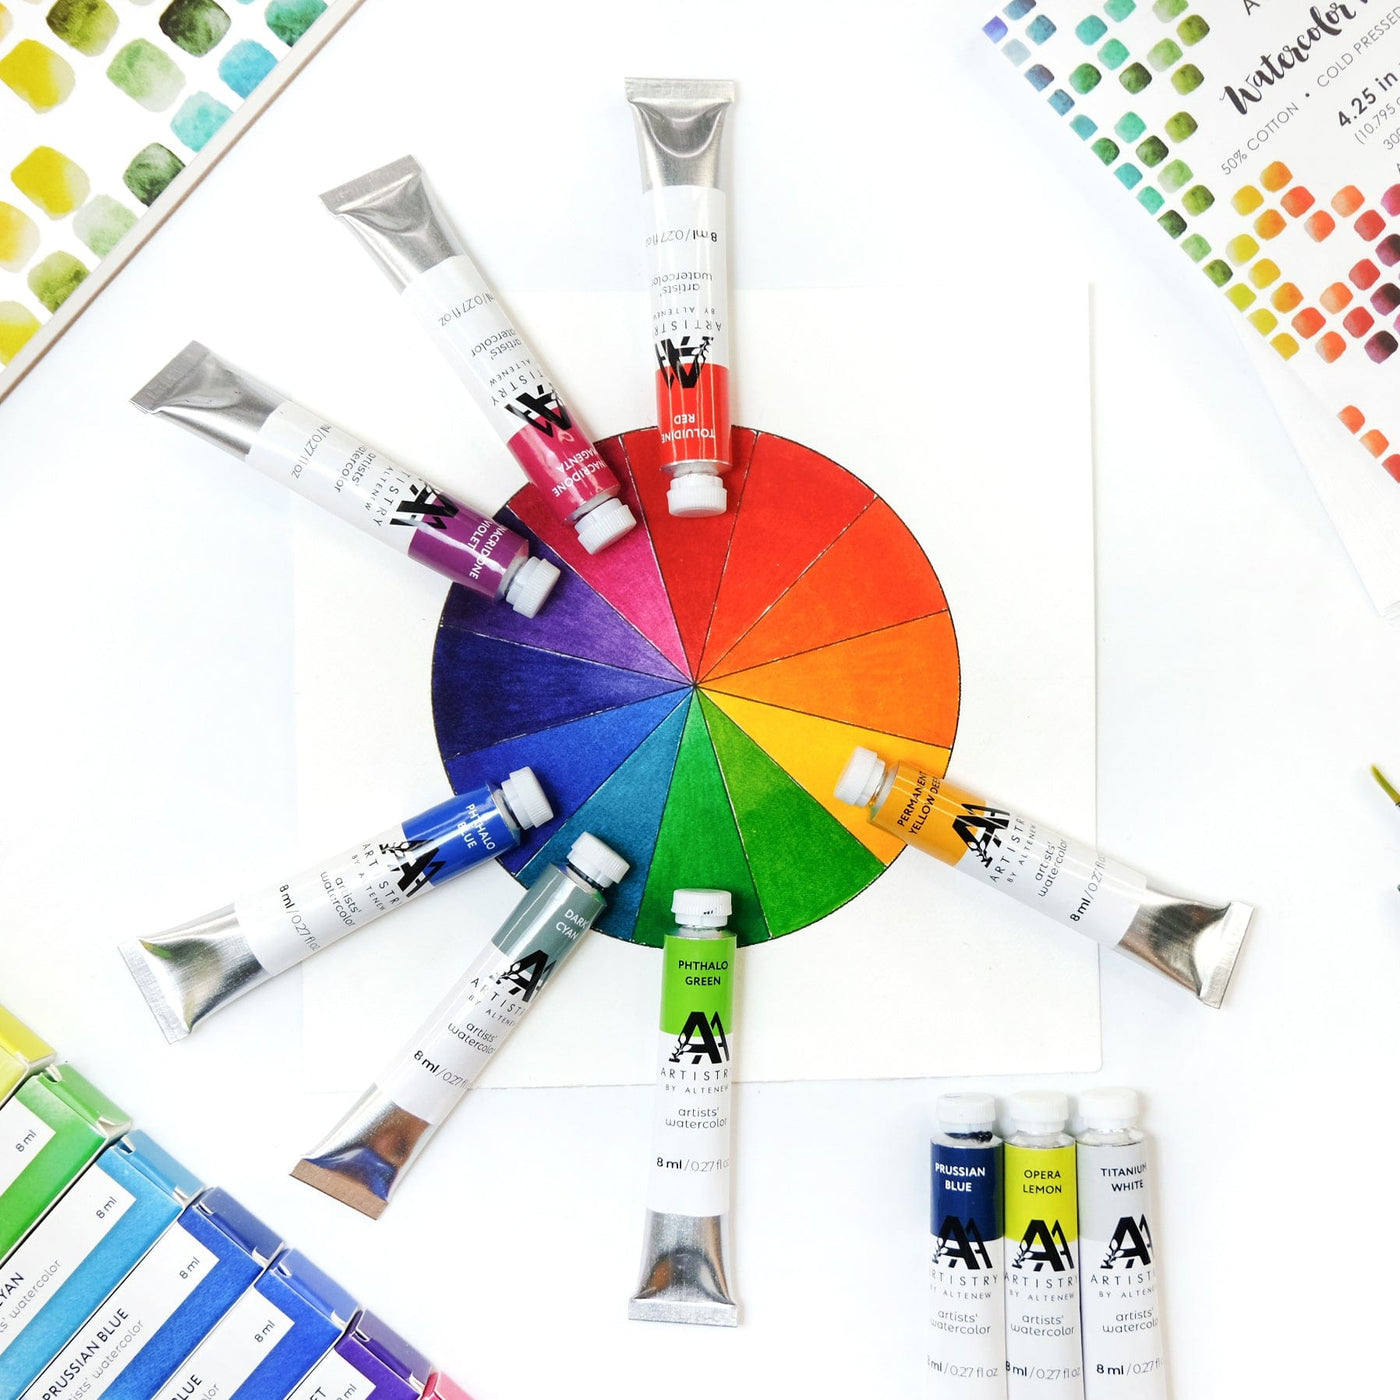 Professional Watercolor Accessories  Artistry by Altenew –  ArtistrybyAltenew